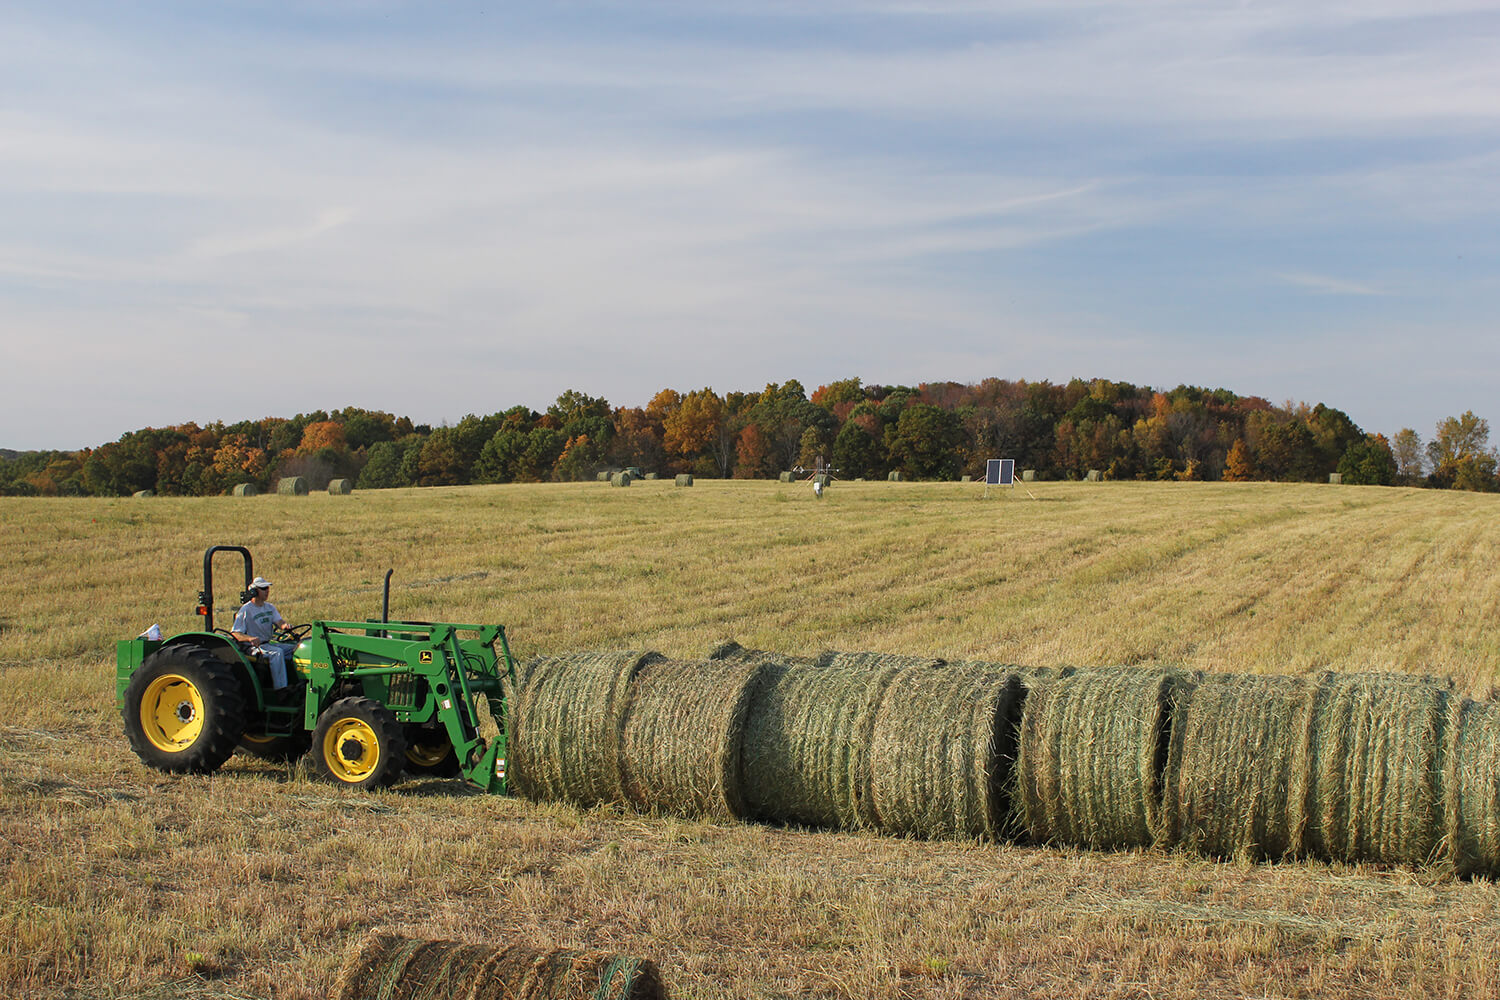 Tractor with switchgras bales in field